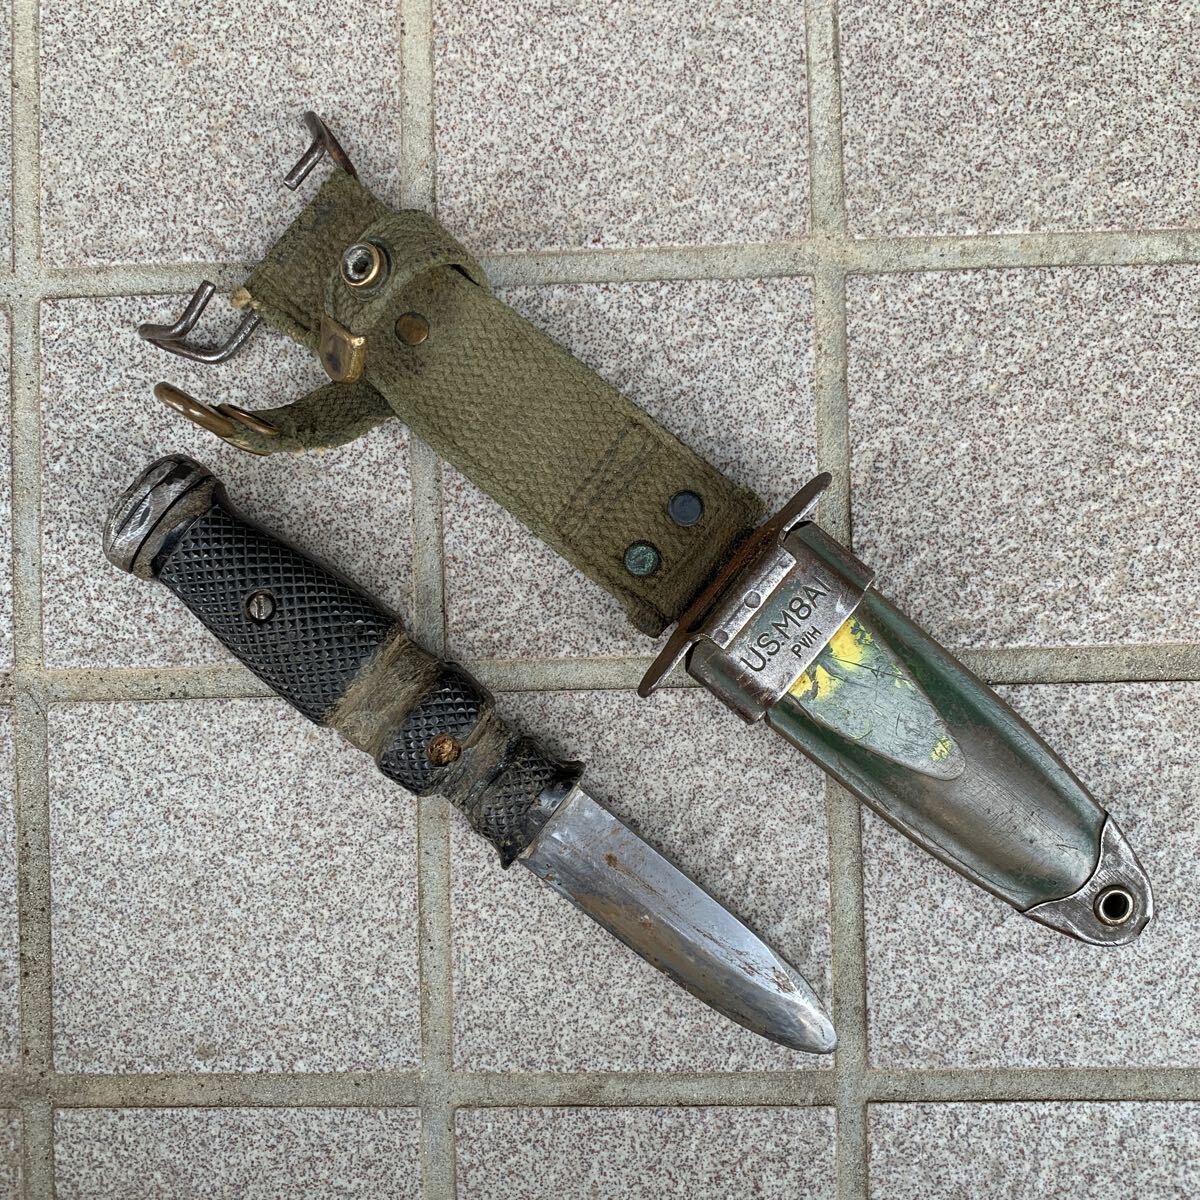  knife US M8A1 the US armed forces gun . total length 21cm sword blade approximately 9cm case attaching delivery goods present condition goods 